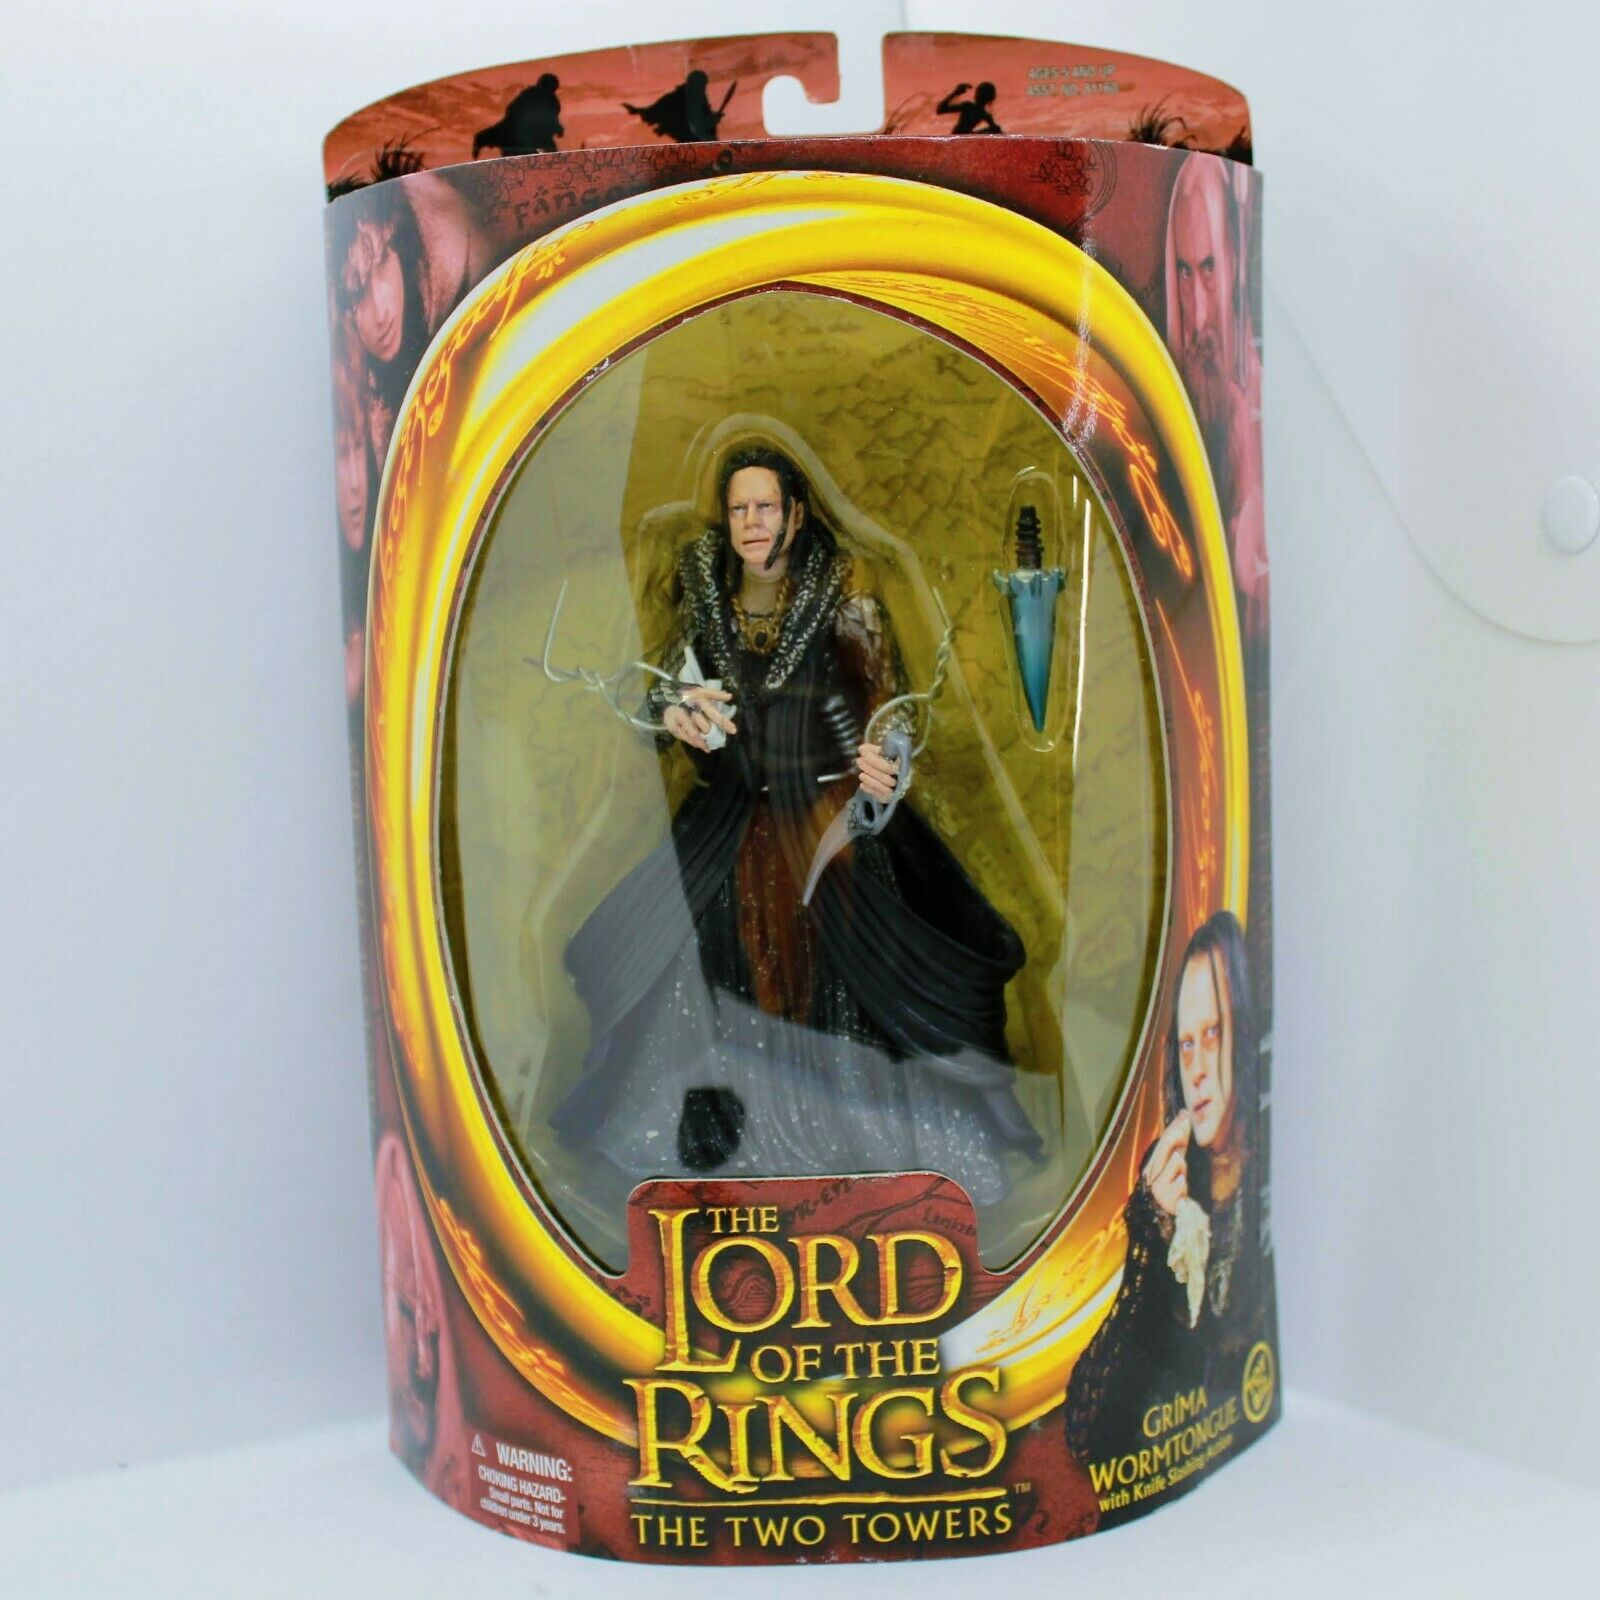 Grìma Wormtongue (The Lord of the Rings) – Time to collect